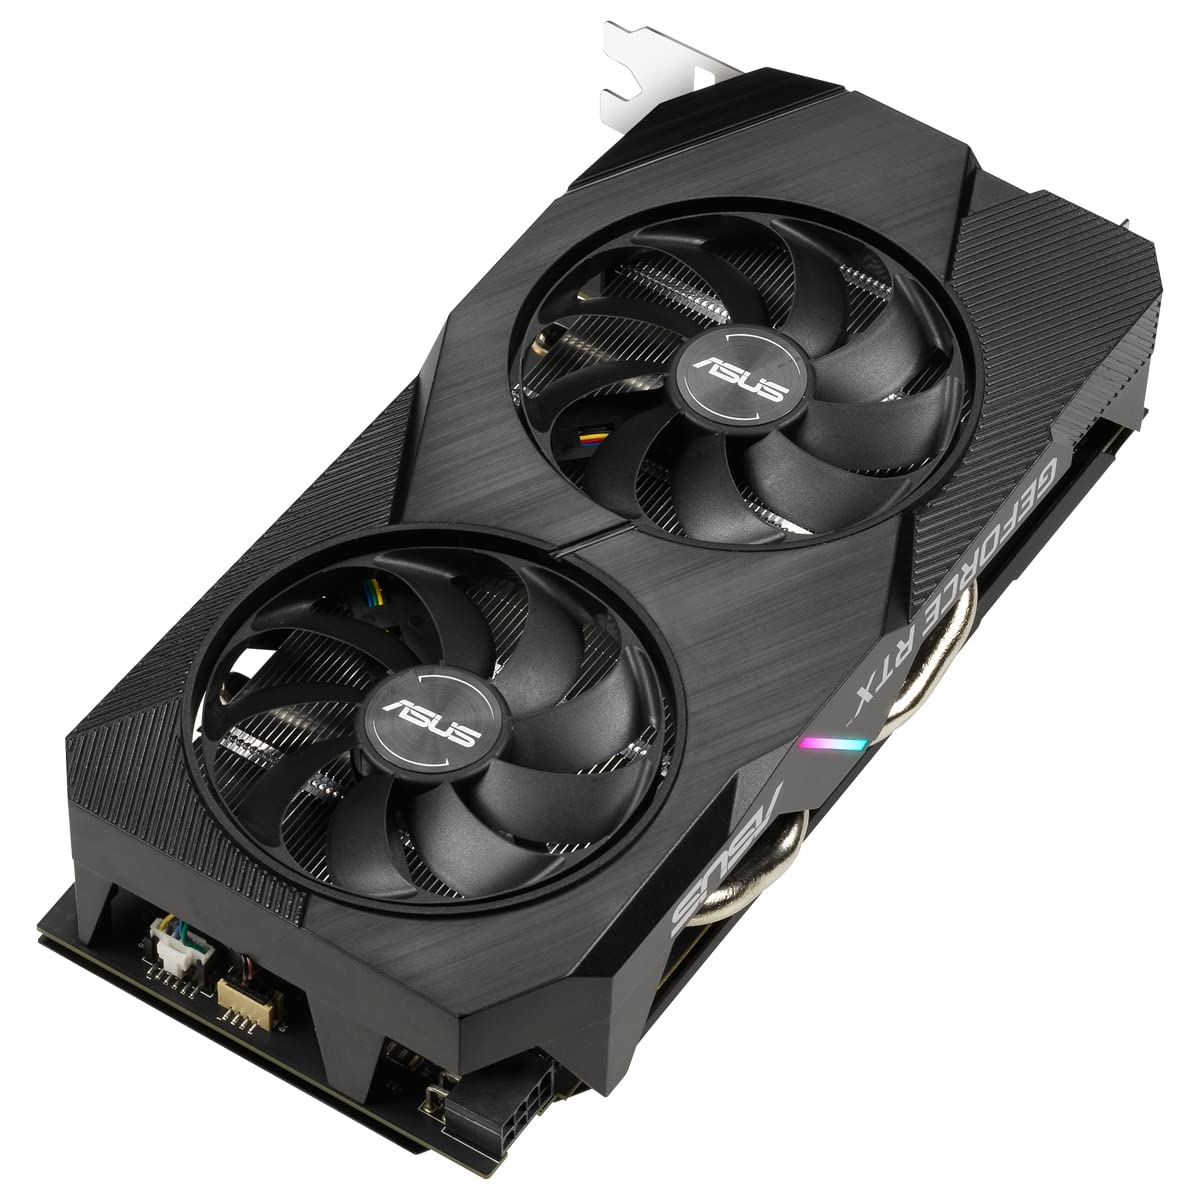 ASUS Dual GeForce RTX™ 2060 EVO OC Edition 12GB GDDR6 features two powerful Axial-tech fans for AAA gaming performance and ray tracing